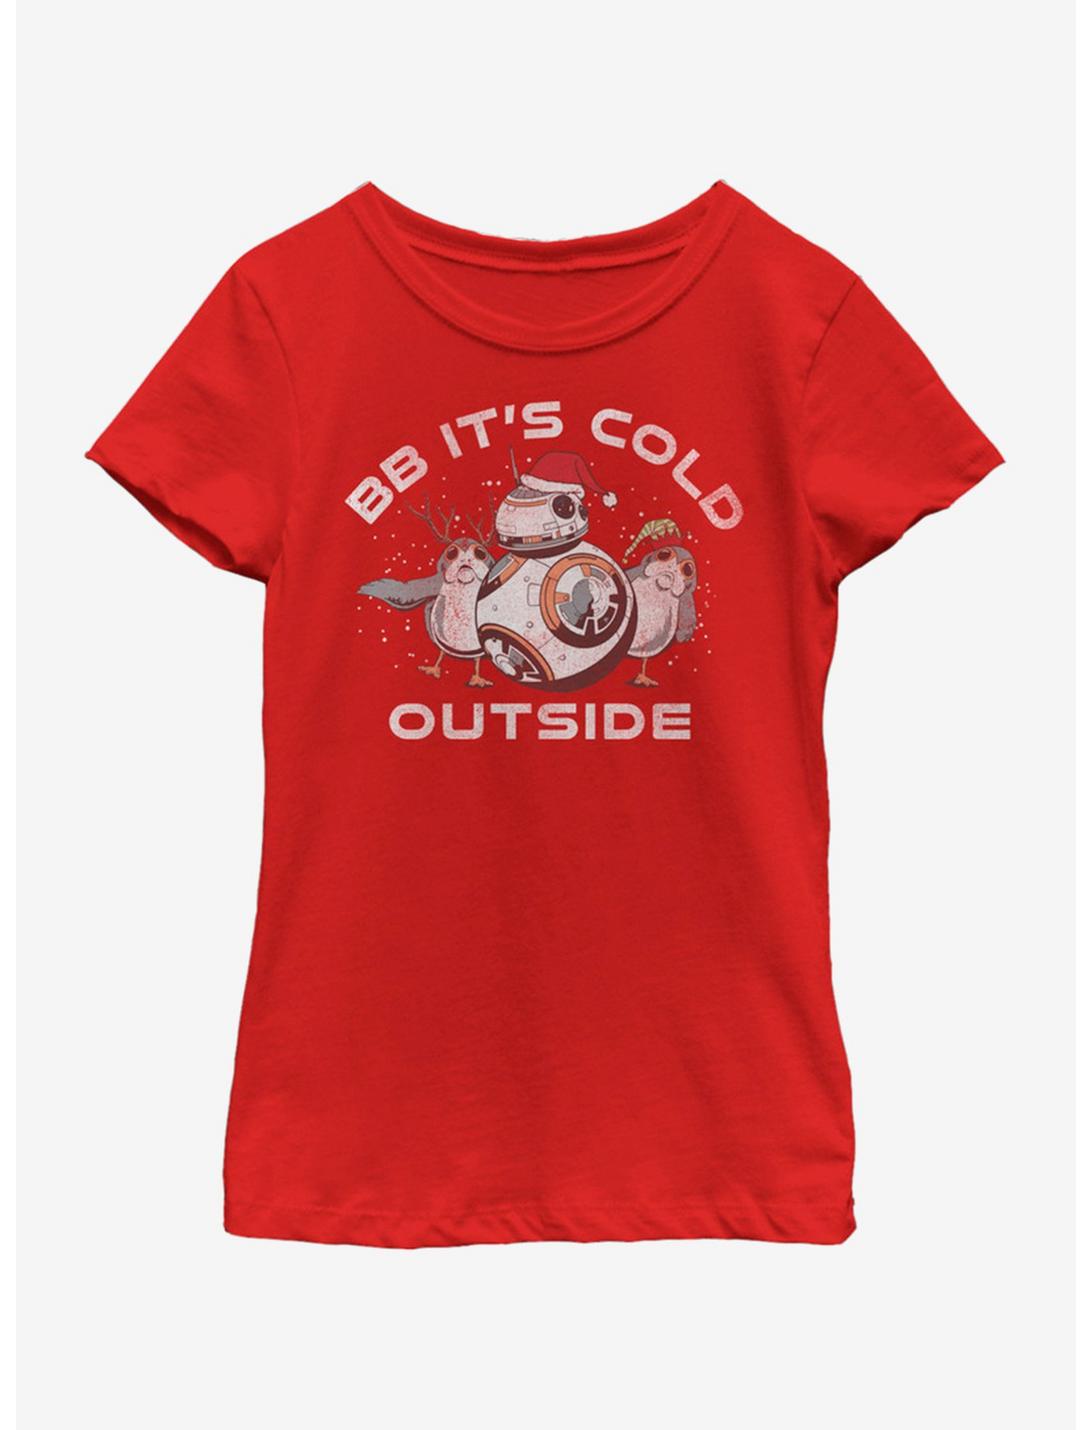 Star Wars The Last Jedi BB Cold Youth Girls T-Shirt, RED, hi-res